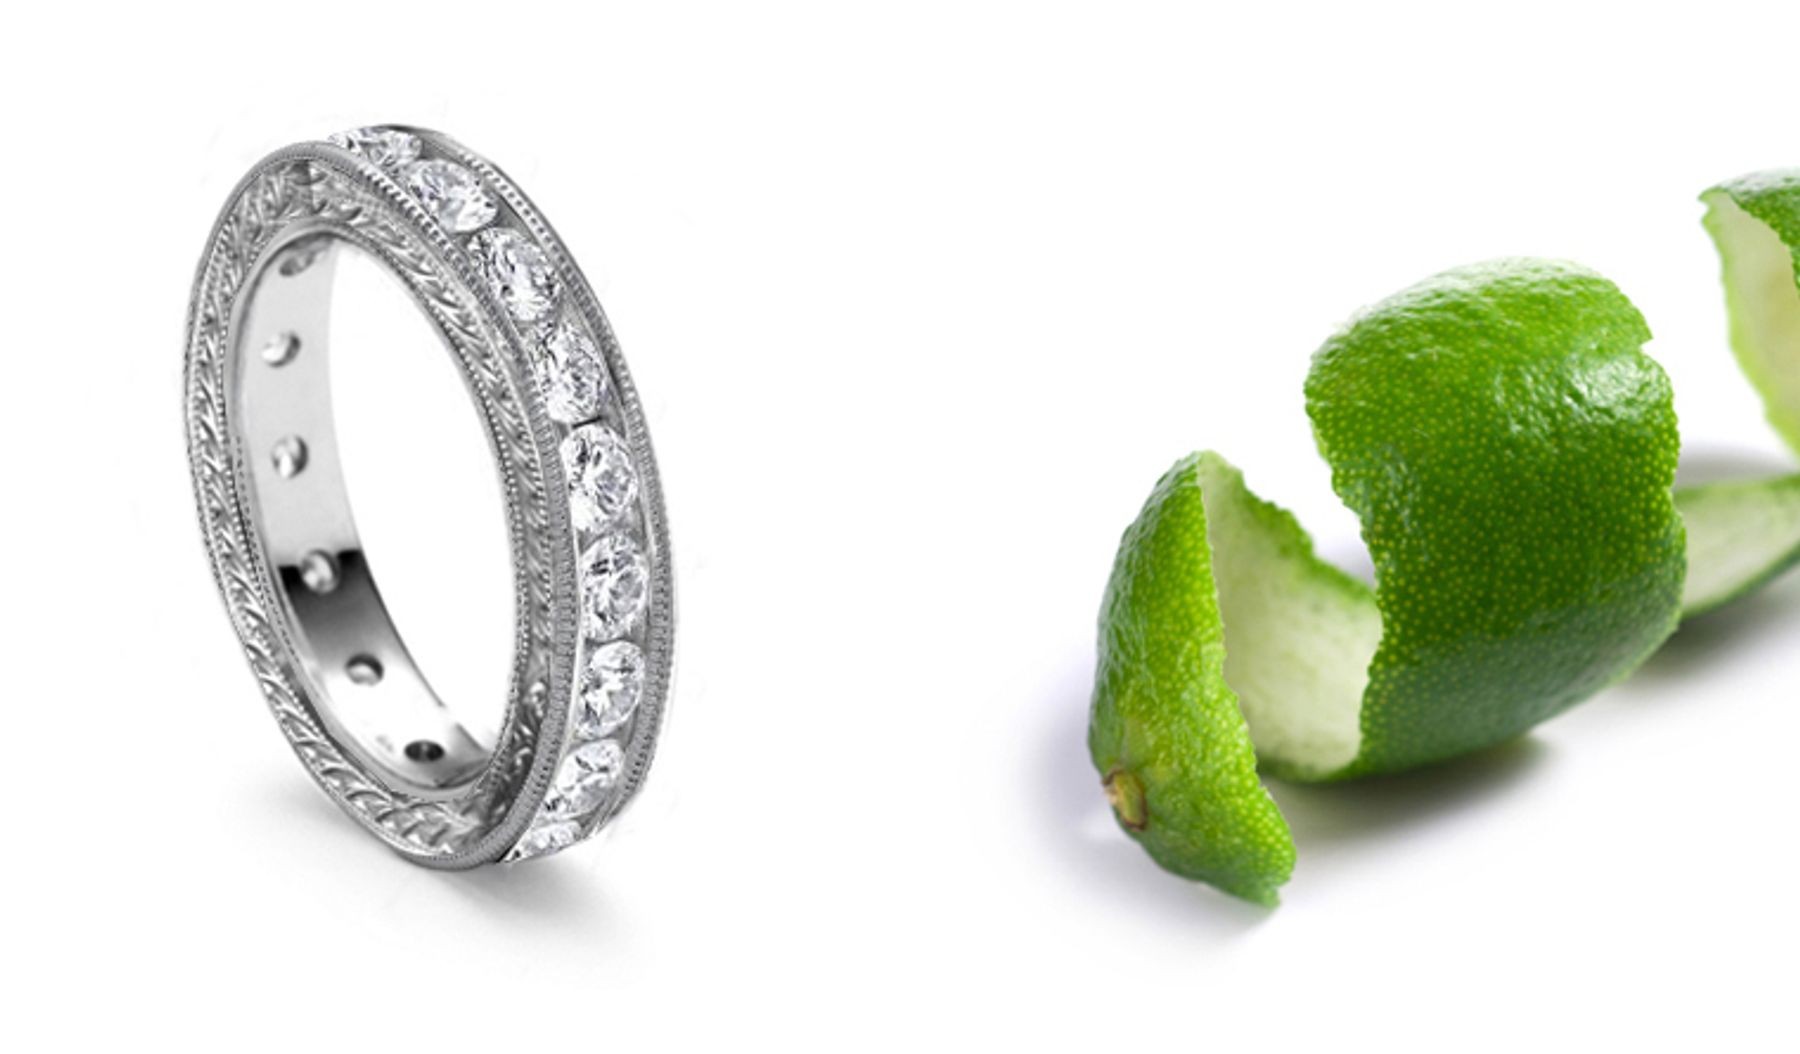 Ancient Scrolls & Motifs: Diamonds cover the entire band and are precision set with delicate engraving 